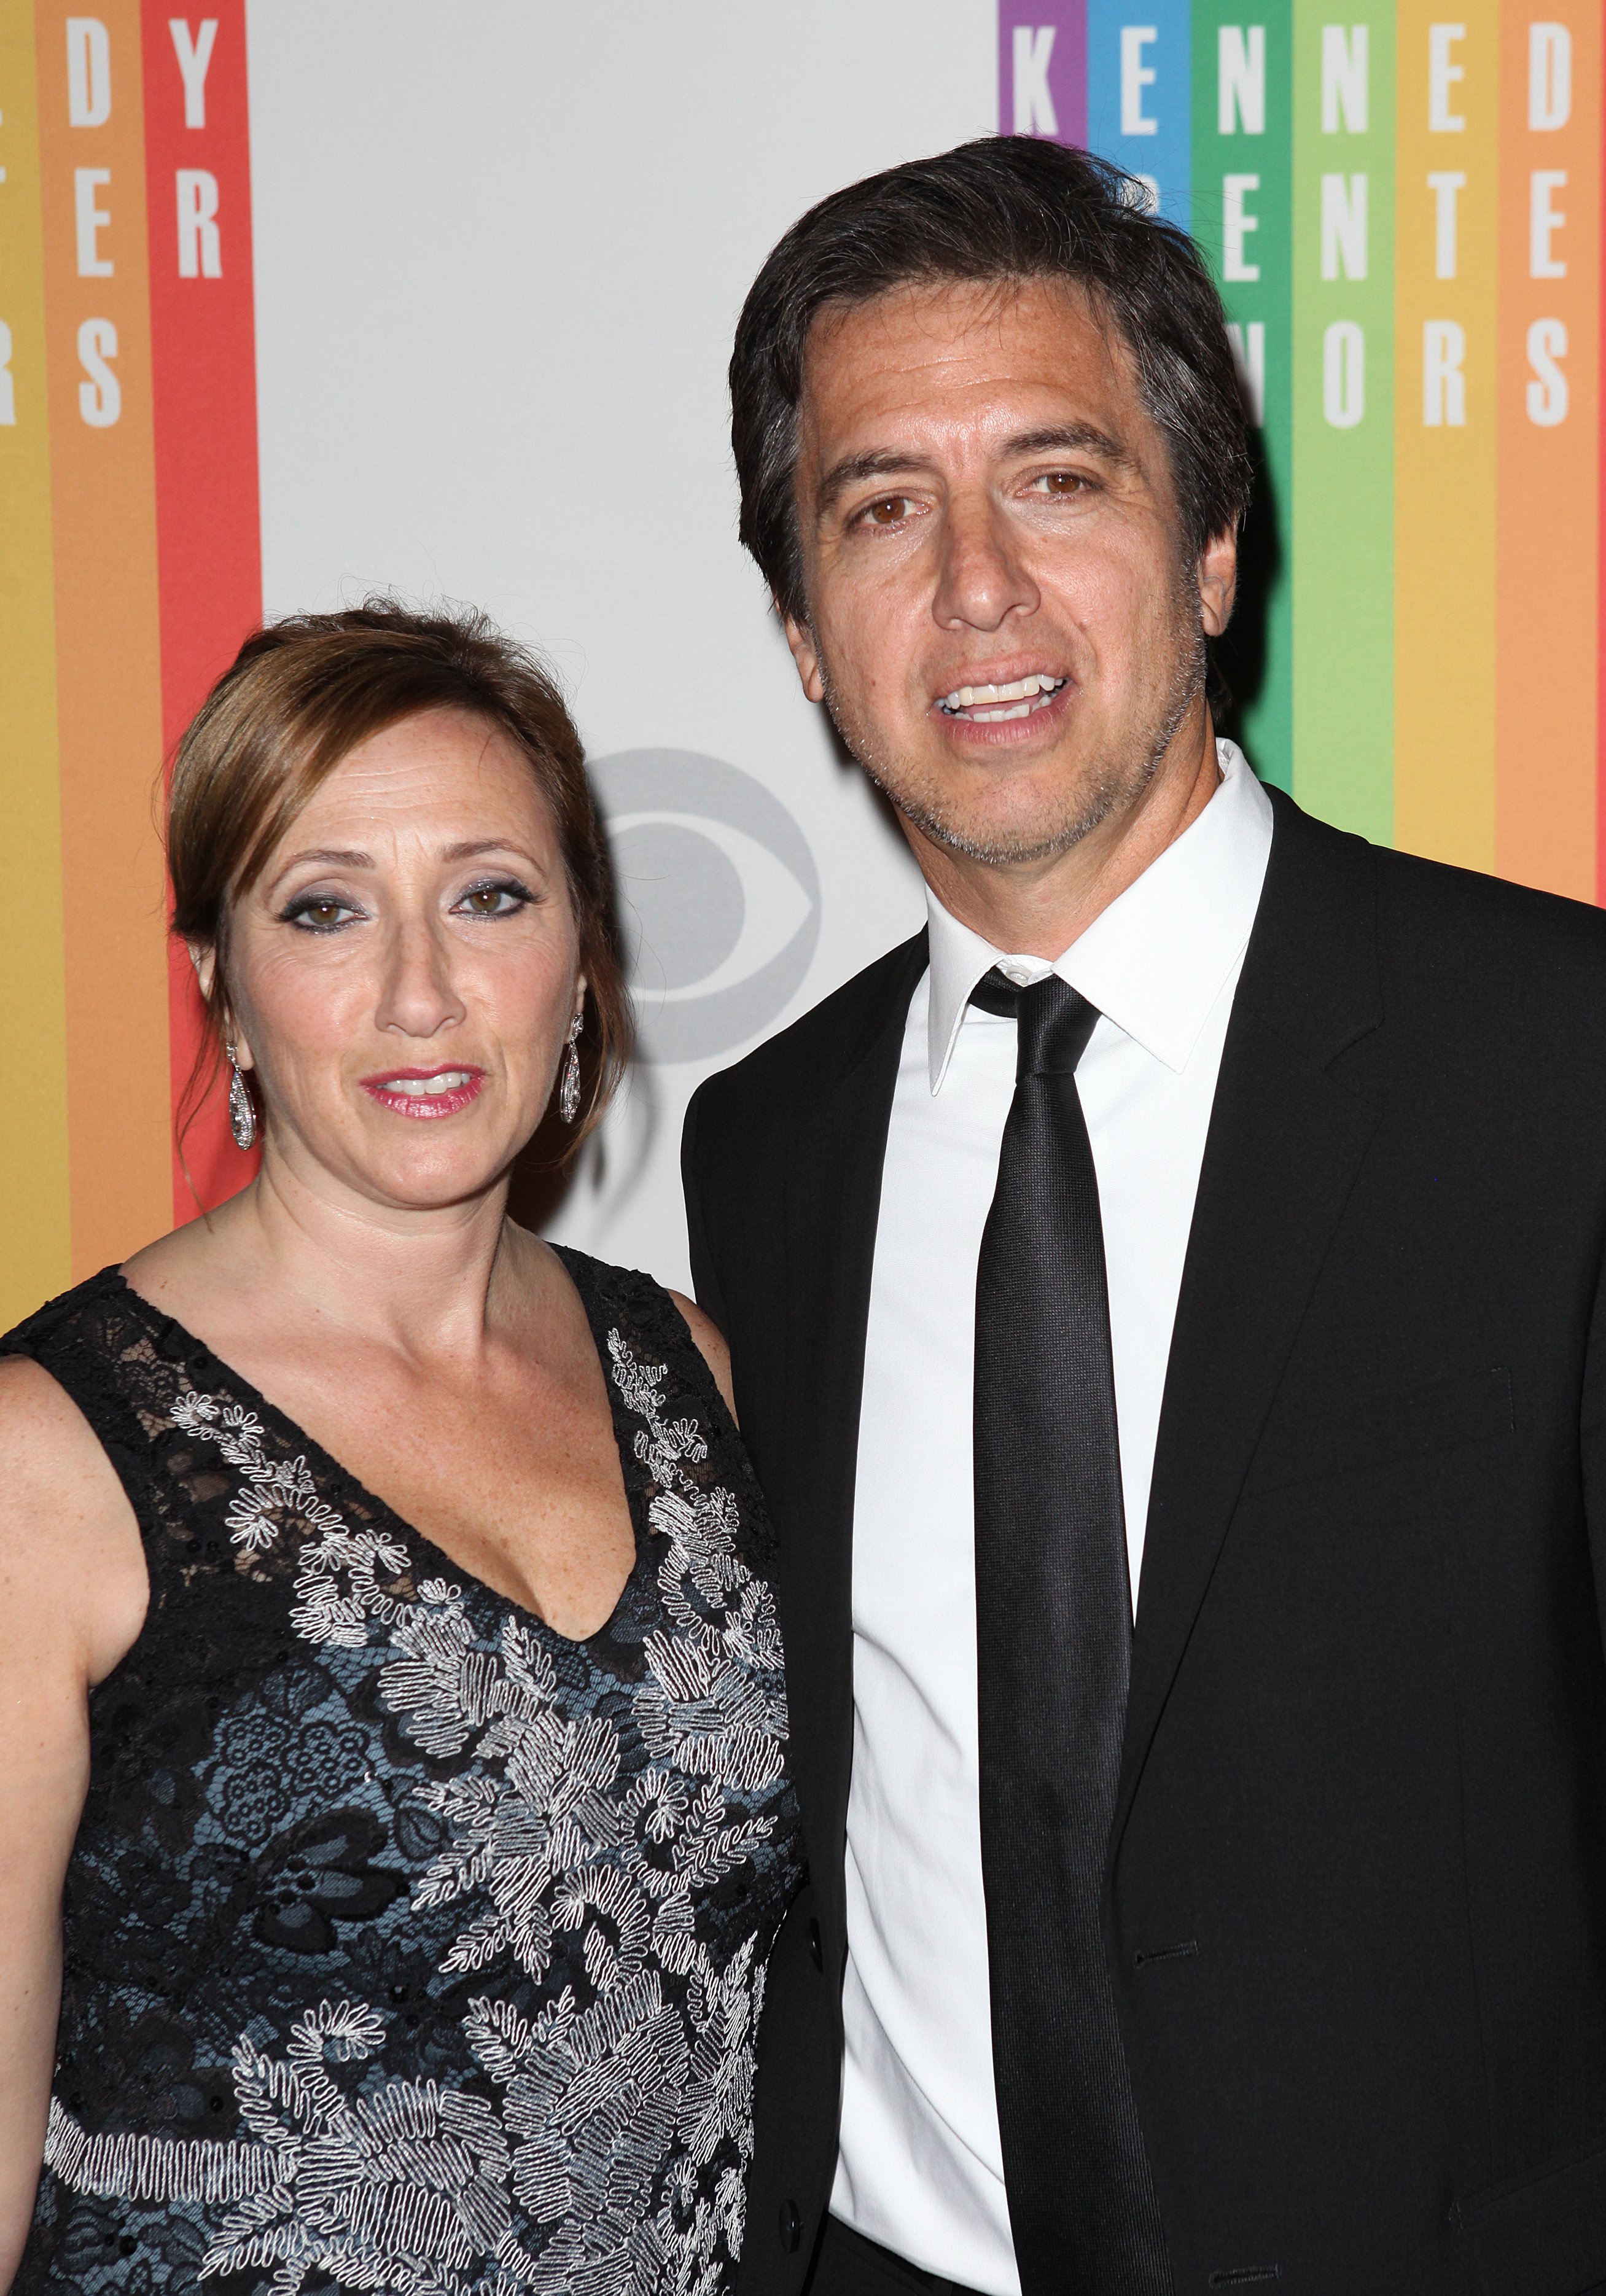 Anna and Ray Romano at the 35th Kennedy Center Honors at Kennedy Center in Washington, D.C. on December 2, 2012 | Source: Getty Images